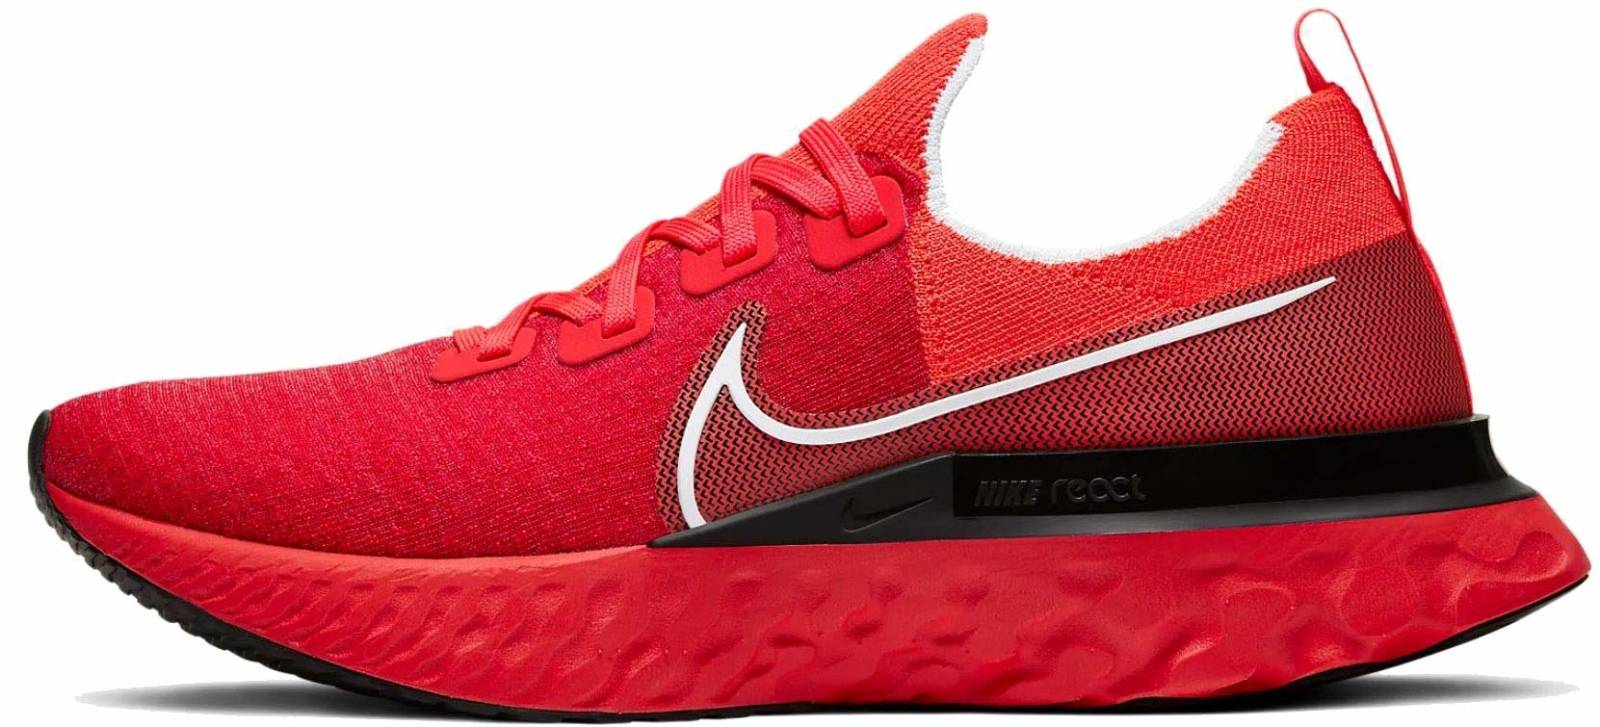 30+ Red Nike running shoes: Save up to 